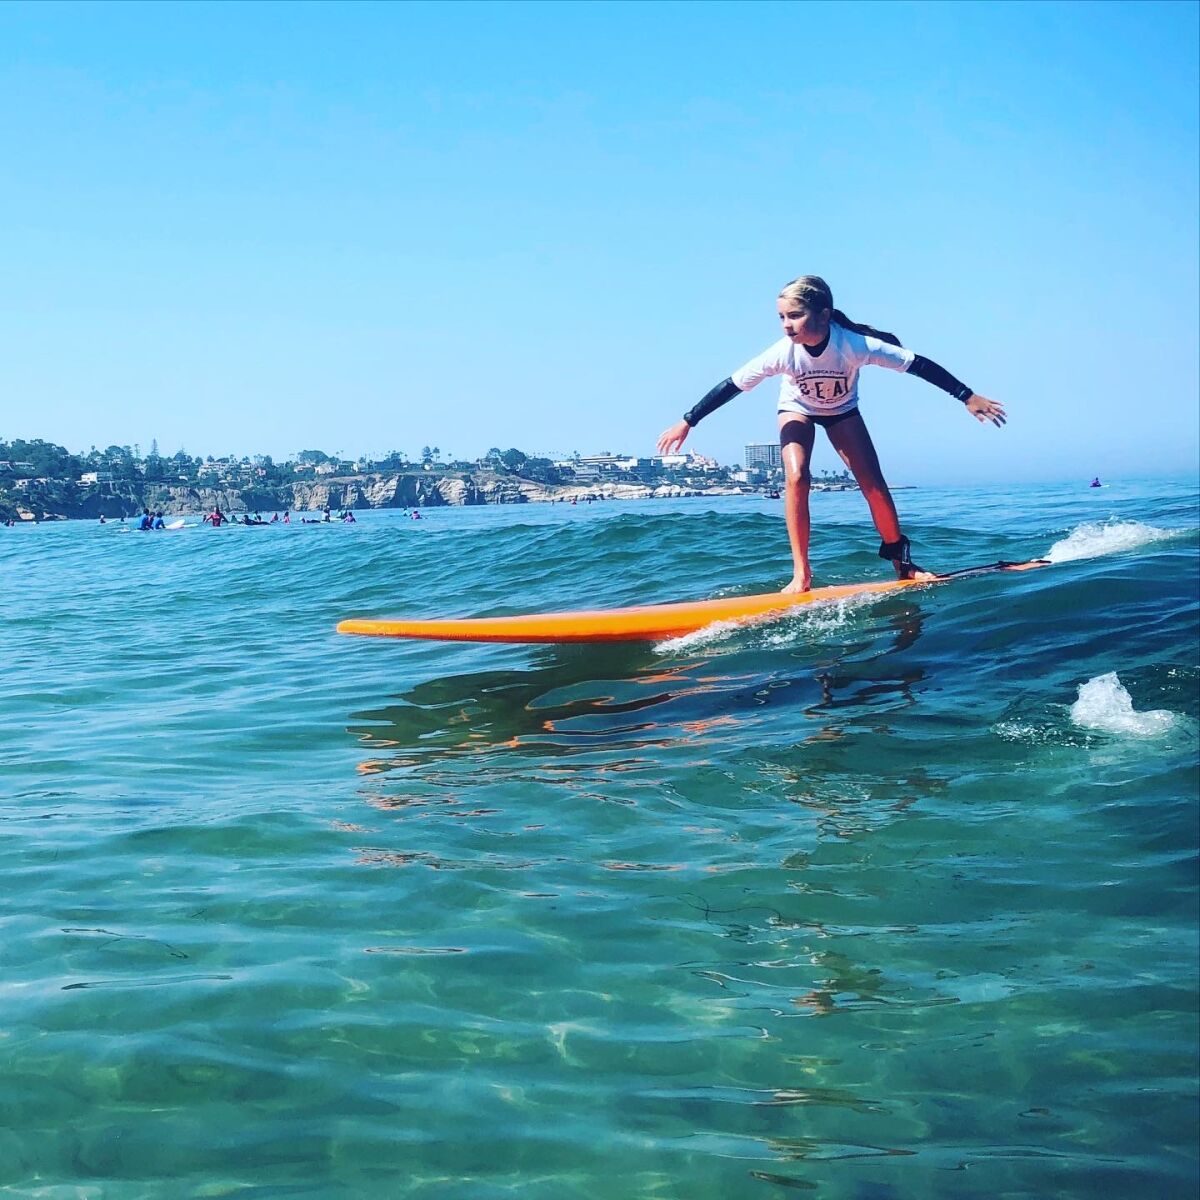 A student at the La Jolla Shores-based Surf Education Academy takes to the water.